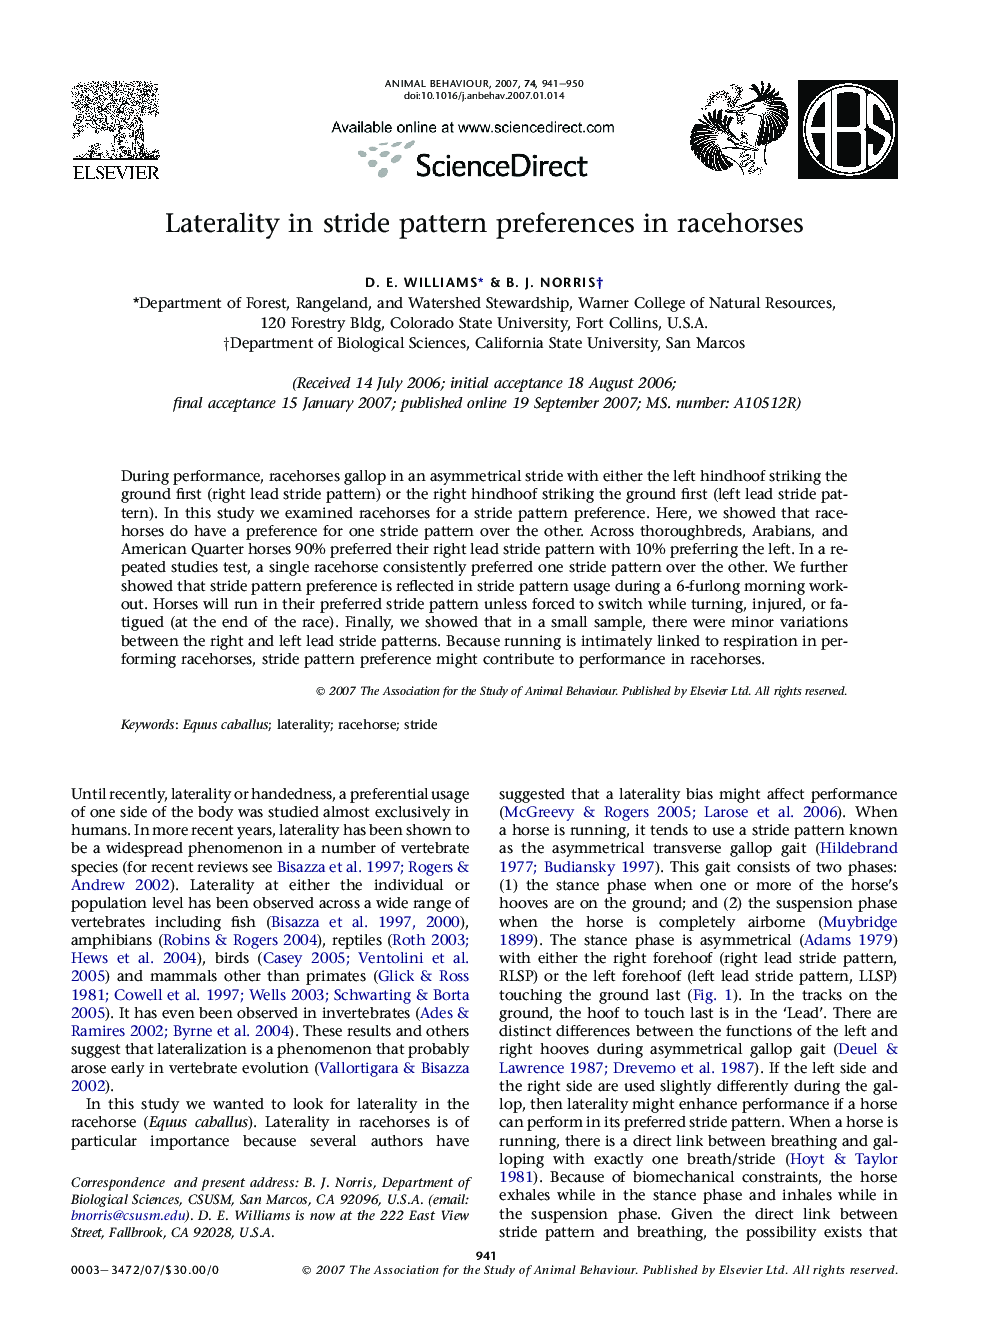 Laterality in stride pattern preferences in racehorses